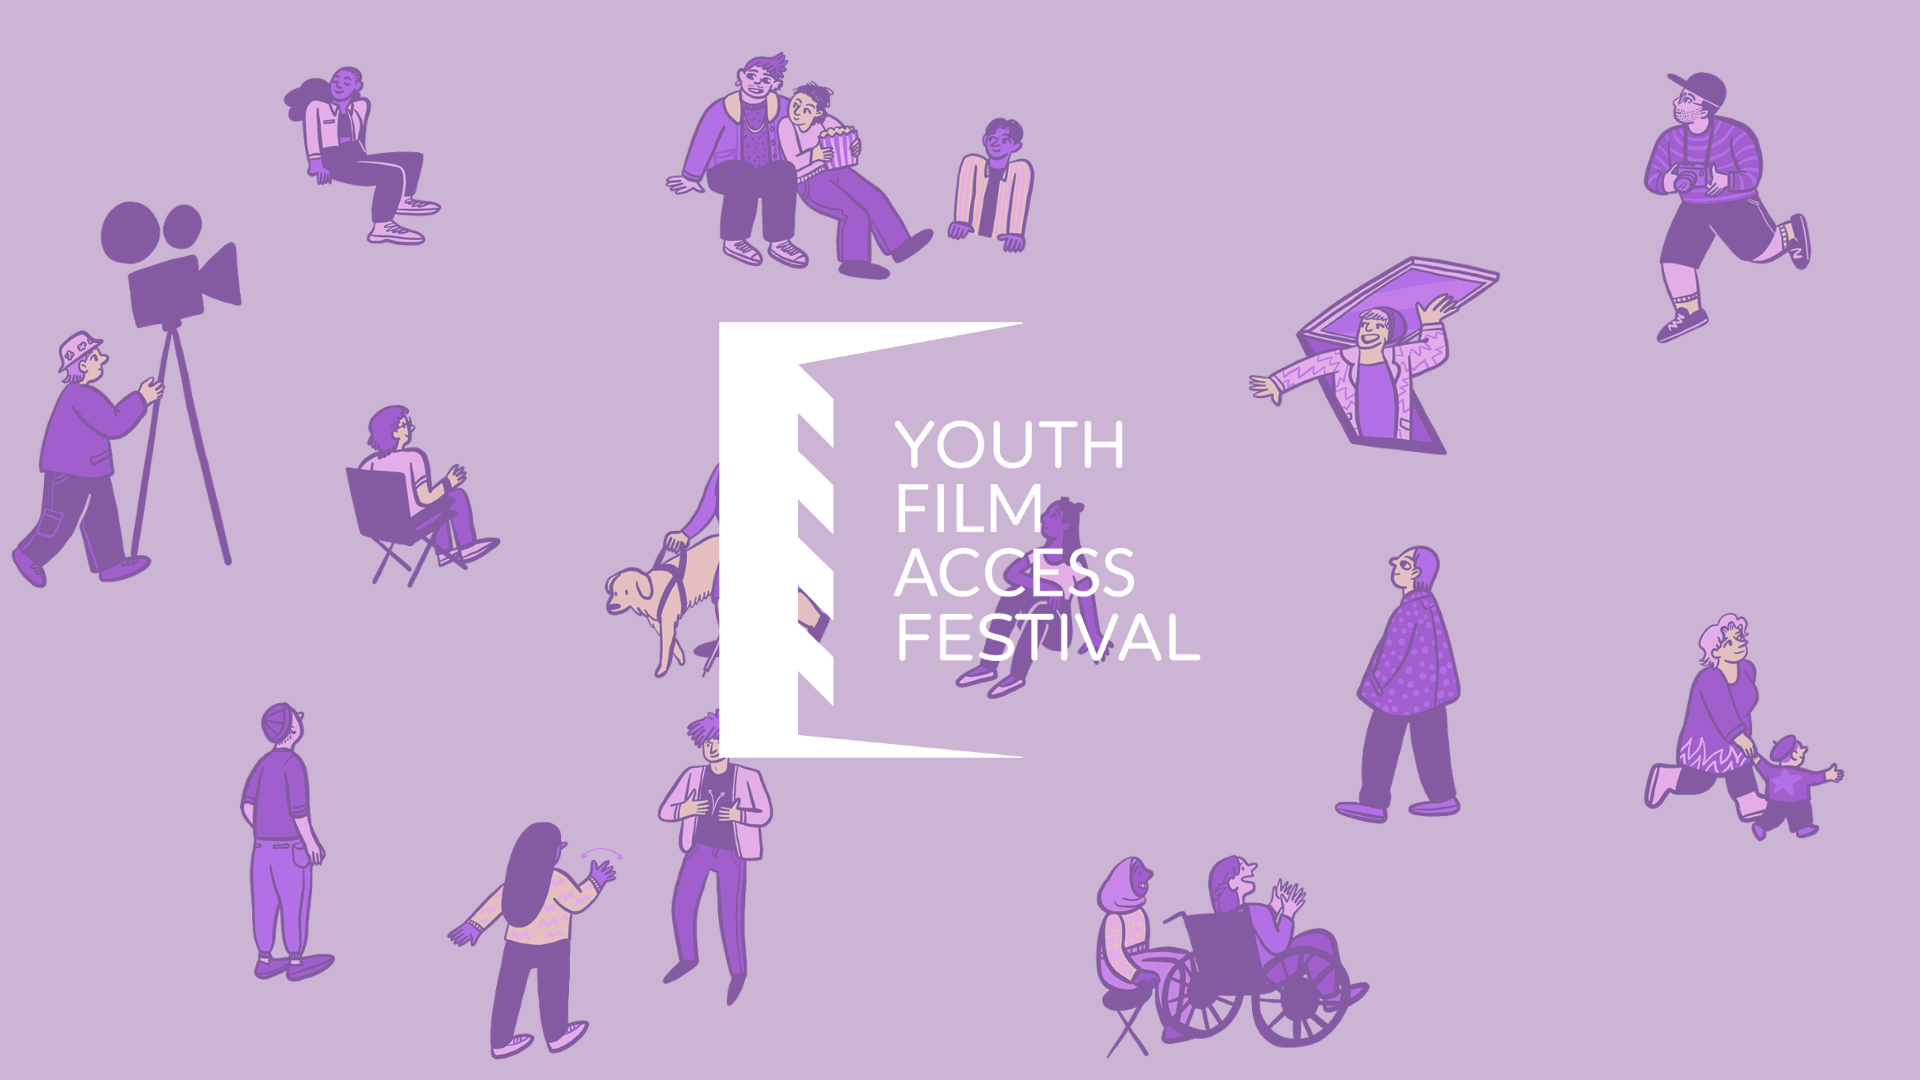 Lilac background with various diverse animated characters drawn in dark purple scattered around the frame. In the centre is the Youth Film Access Festival Logo in white